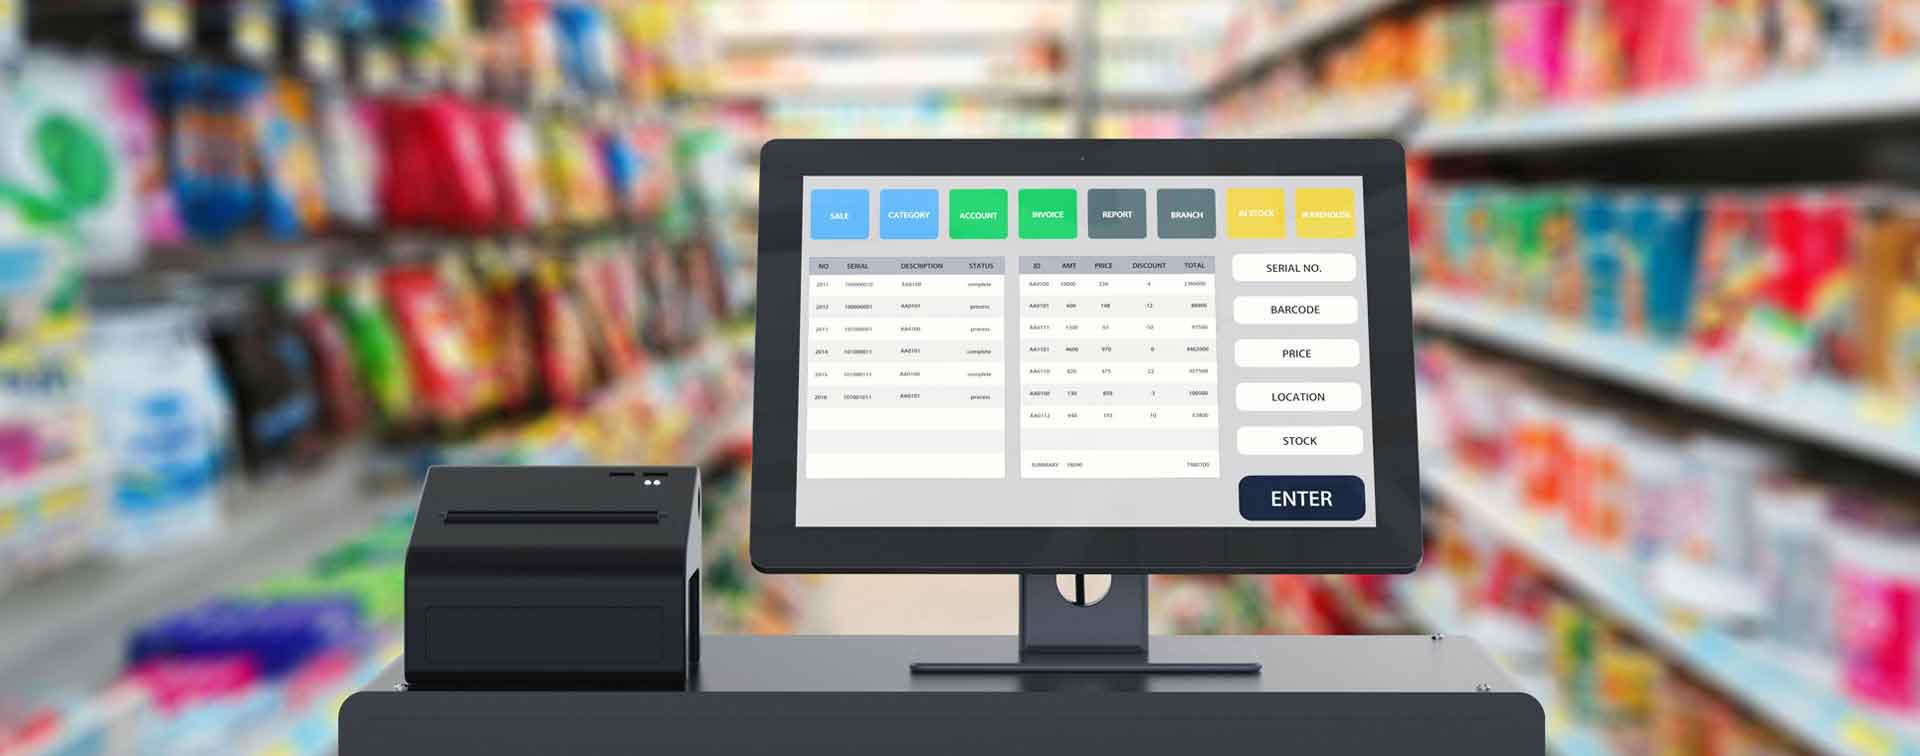 On-Counter Scanning: check-out solutions for countertop and handheld use